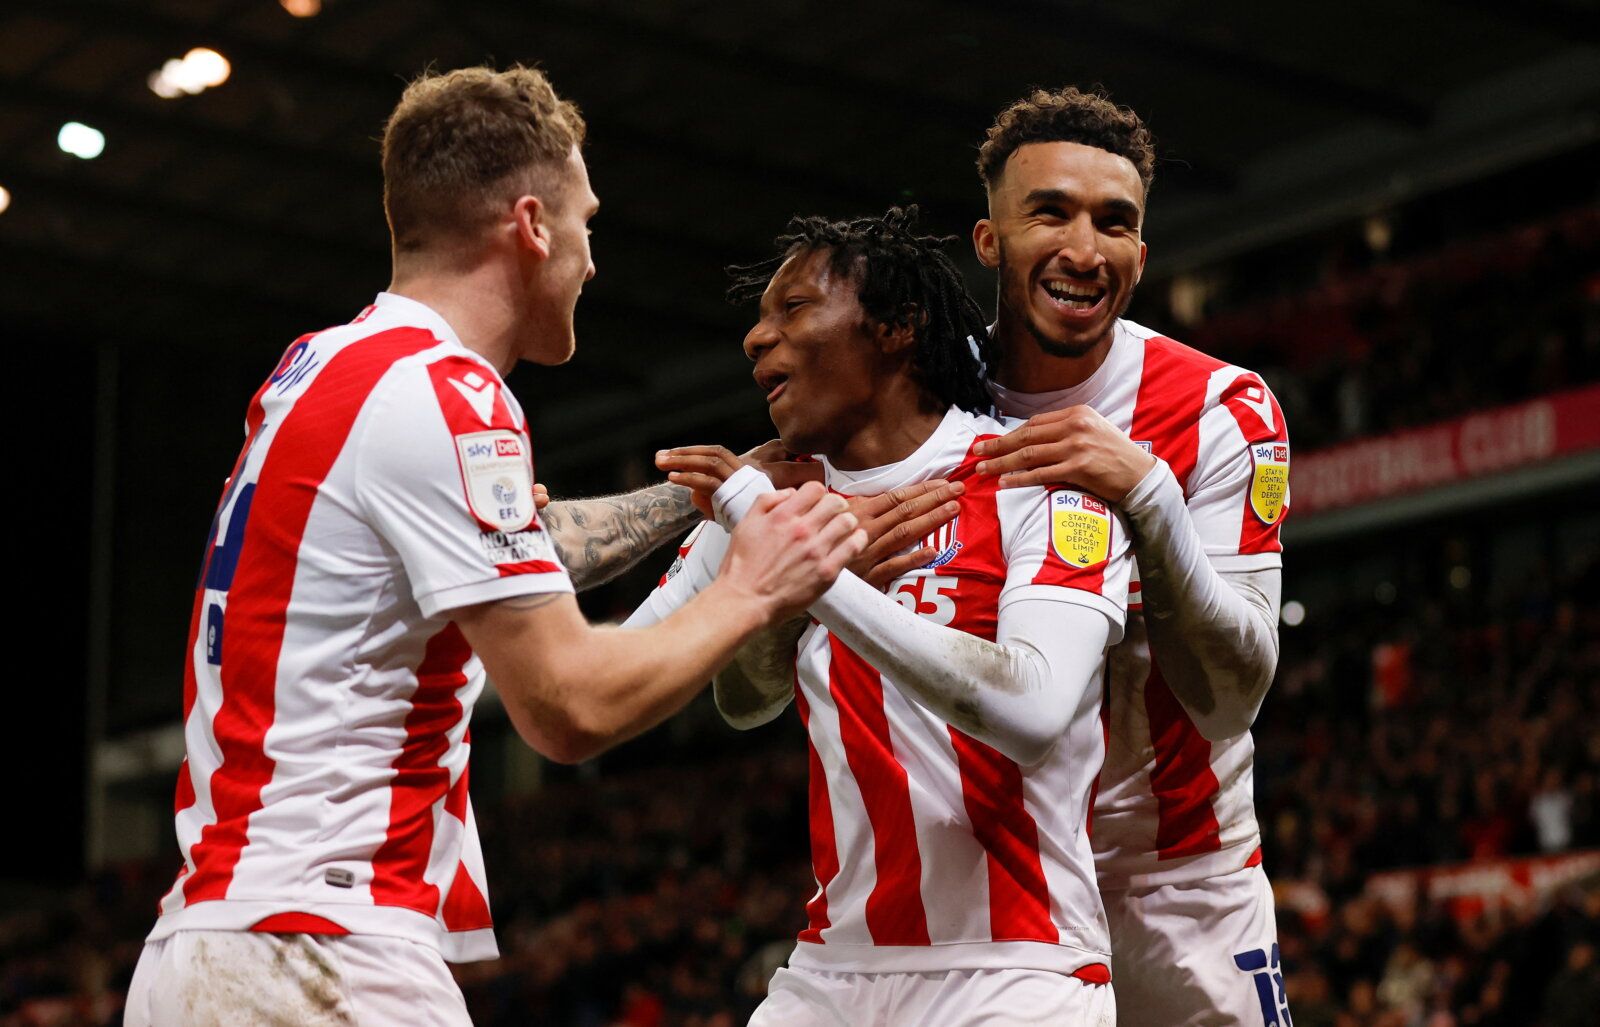 Soccer Football - Championship - Stoke City v Swansea City - bet365 Stadium, Stoke-on-Trent, Britain - February 8, 2022  Stoke City's Jaden Philogene-Bidace celebrates scoring their first goal with teammates   Action Images/Jason Cairnduff  EDITORIAL USE ONLY. No use with unauthorized audio, video, data, fixture lists, club/league logos or 